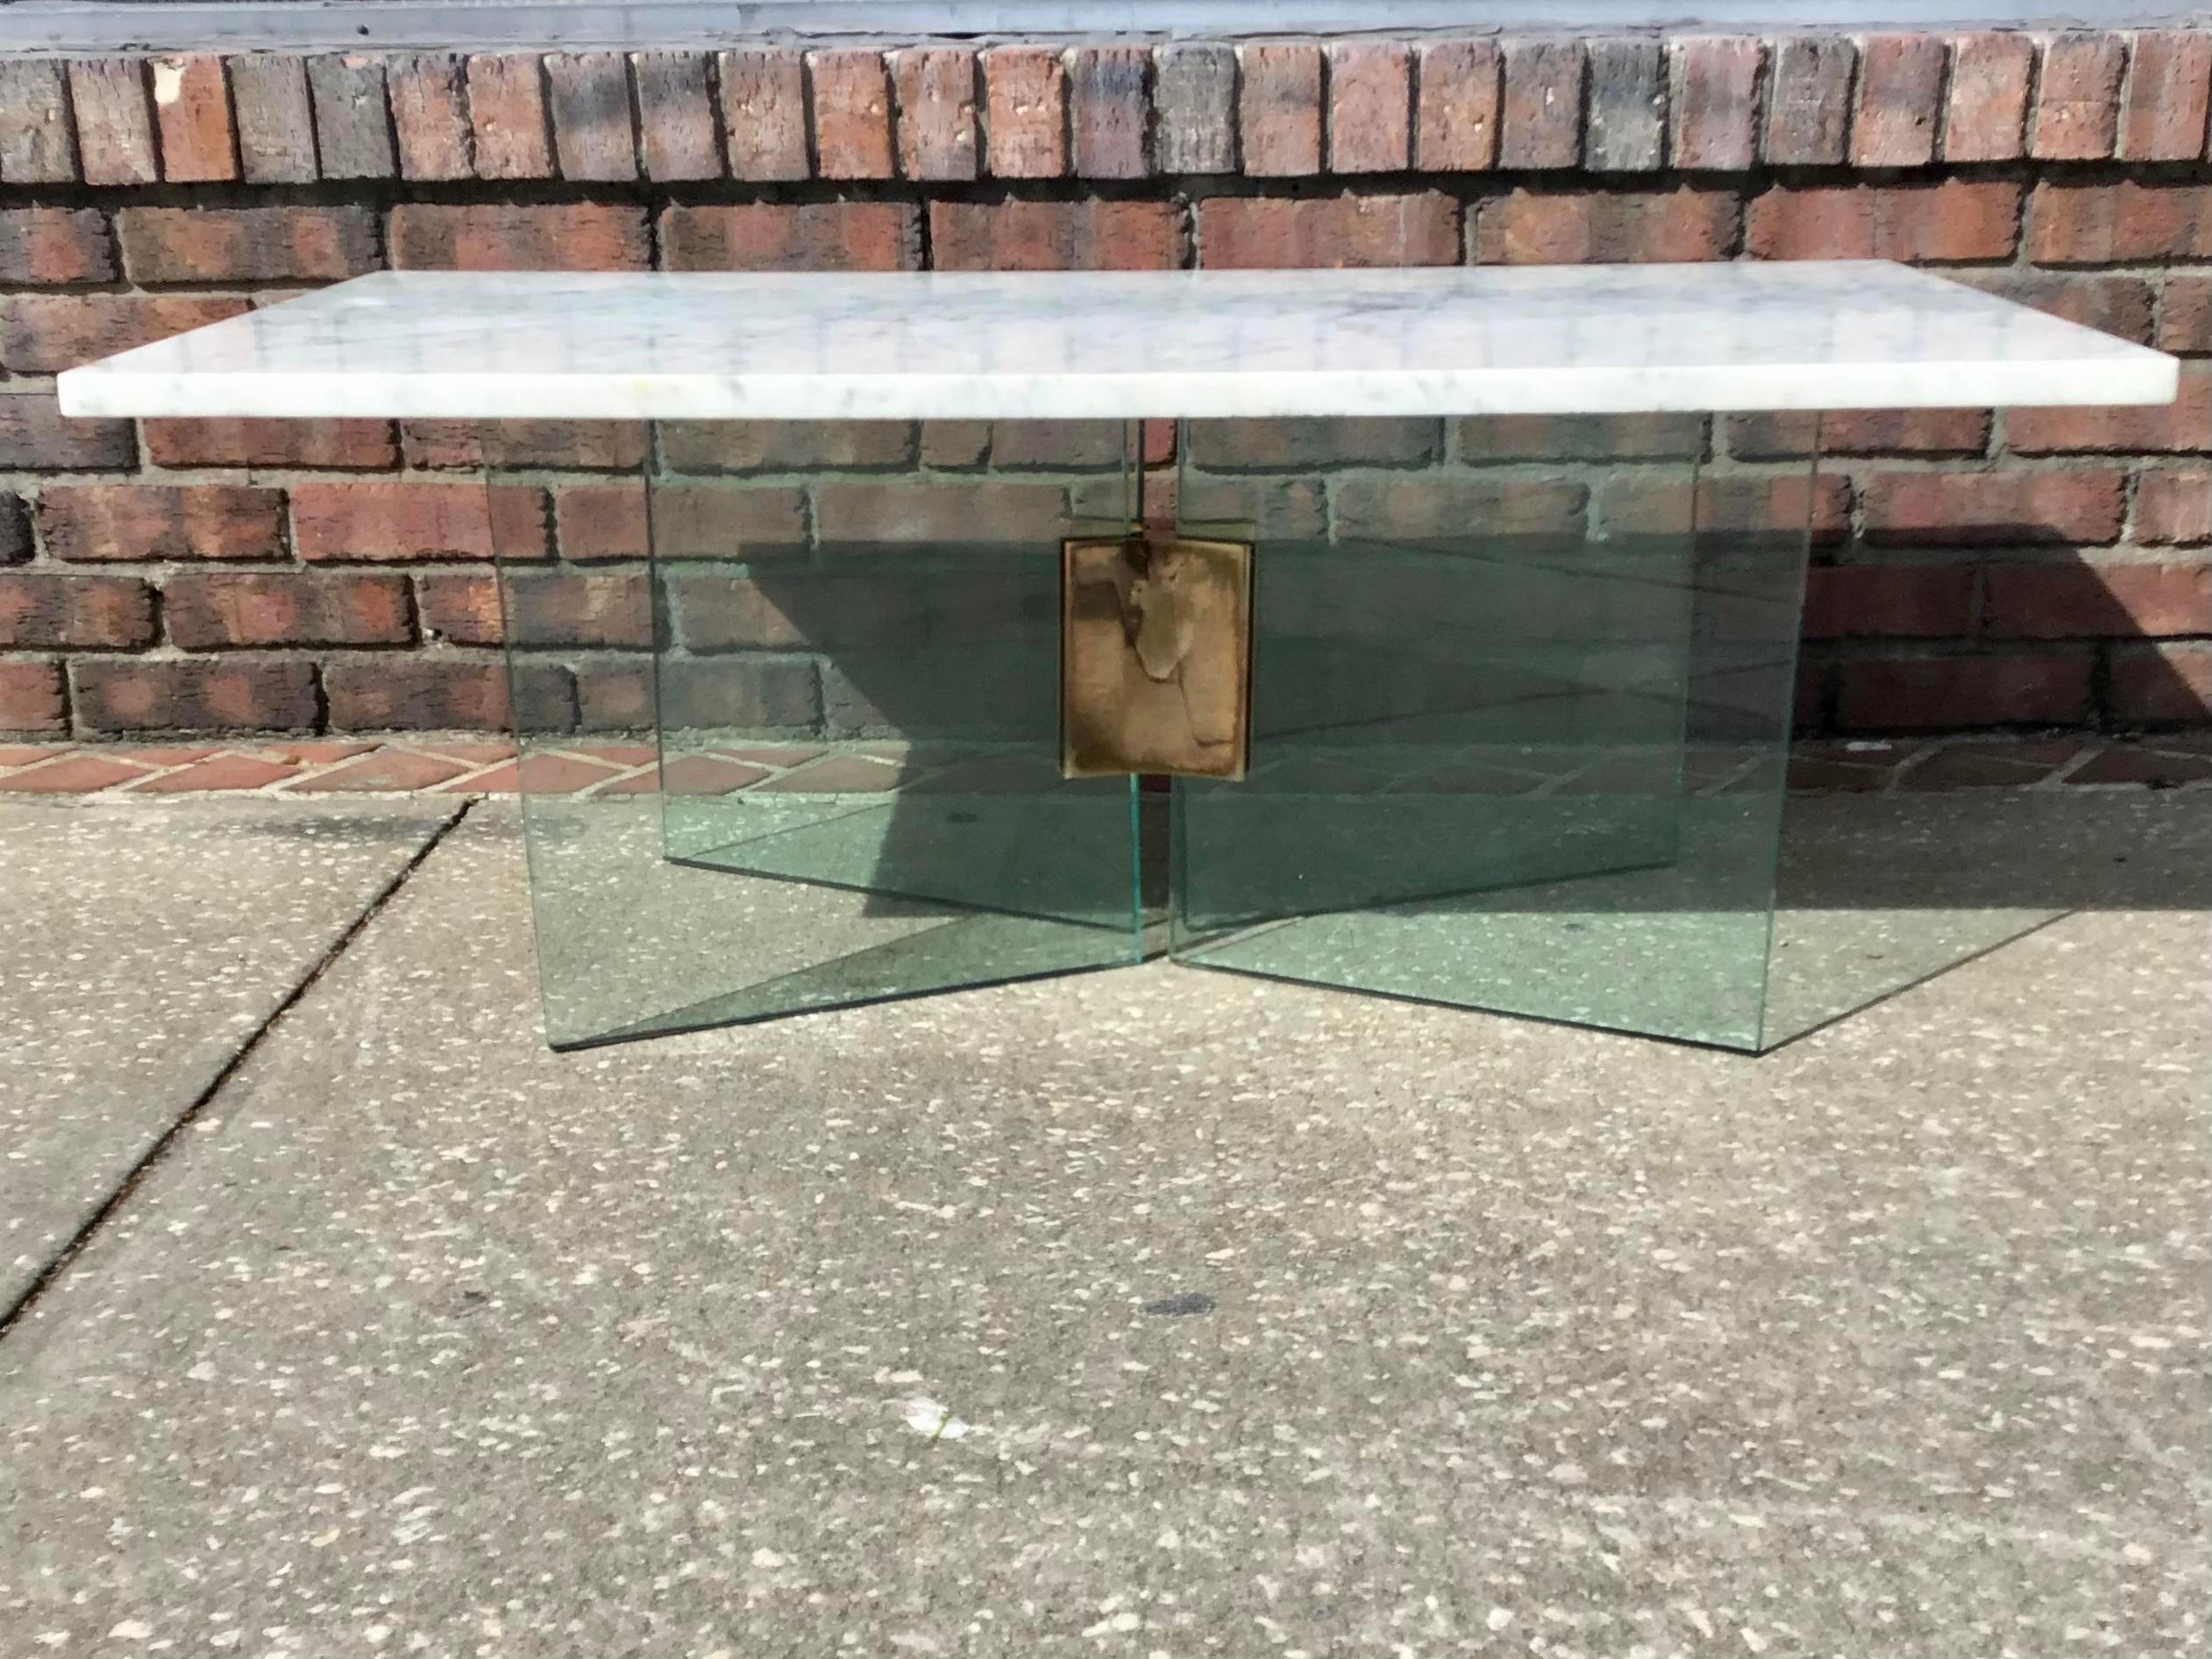 Amazing Alessandro Albrizzi coffee table with glass and brass base with white marble top. Very nice and elegant coffee table with sturdy glass base and a marble top. A few minor stains on marble but consistent with its age.